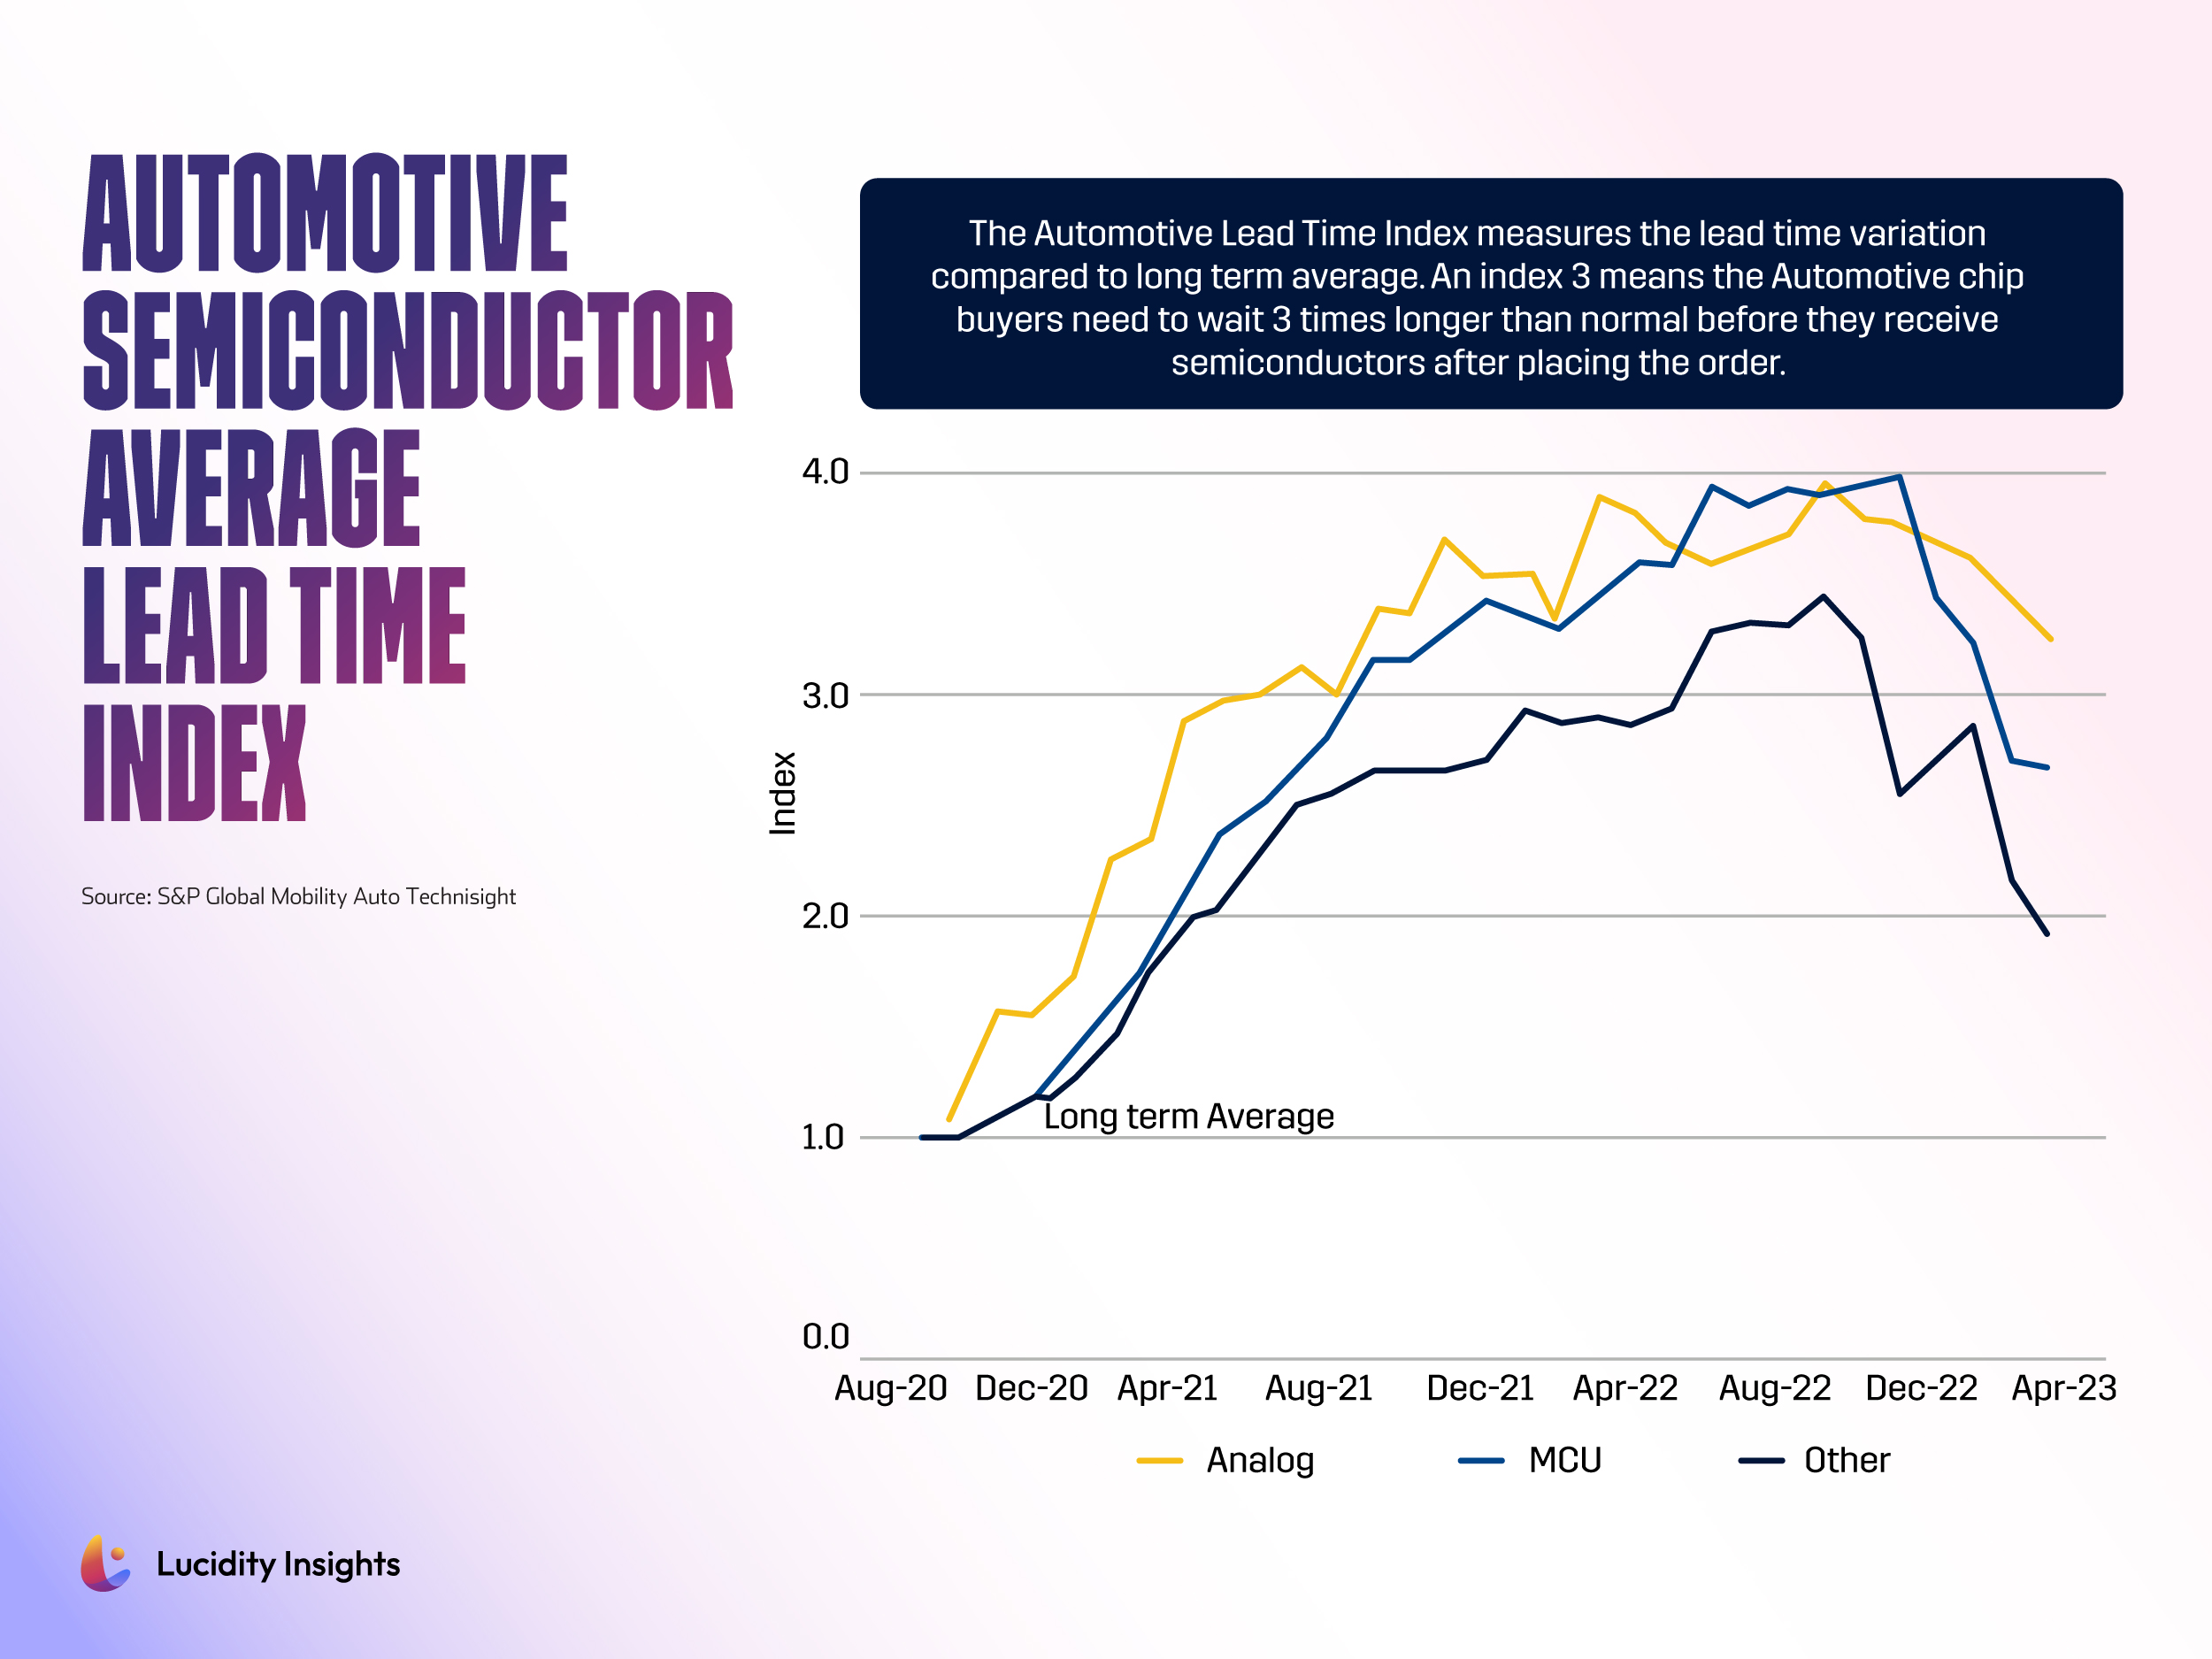 Automotive Semiconductor Average Lead Time Index